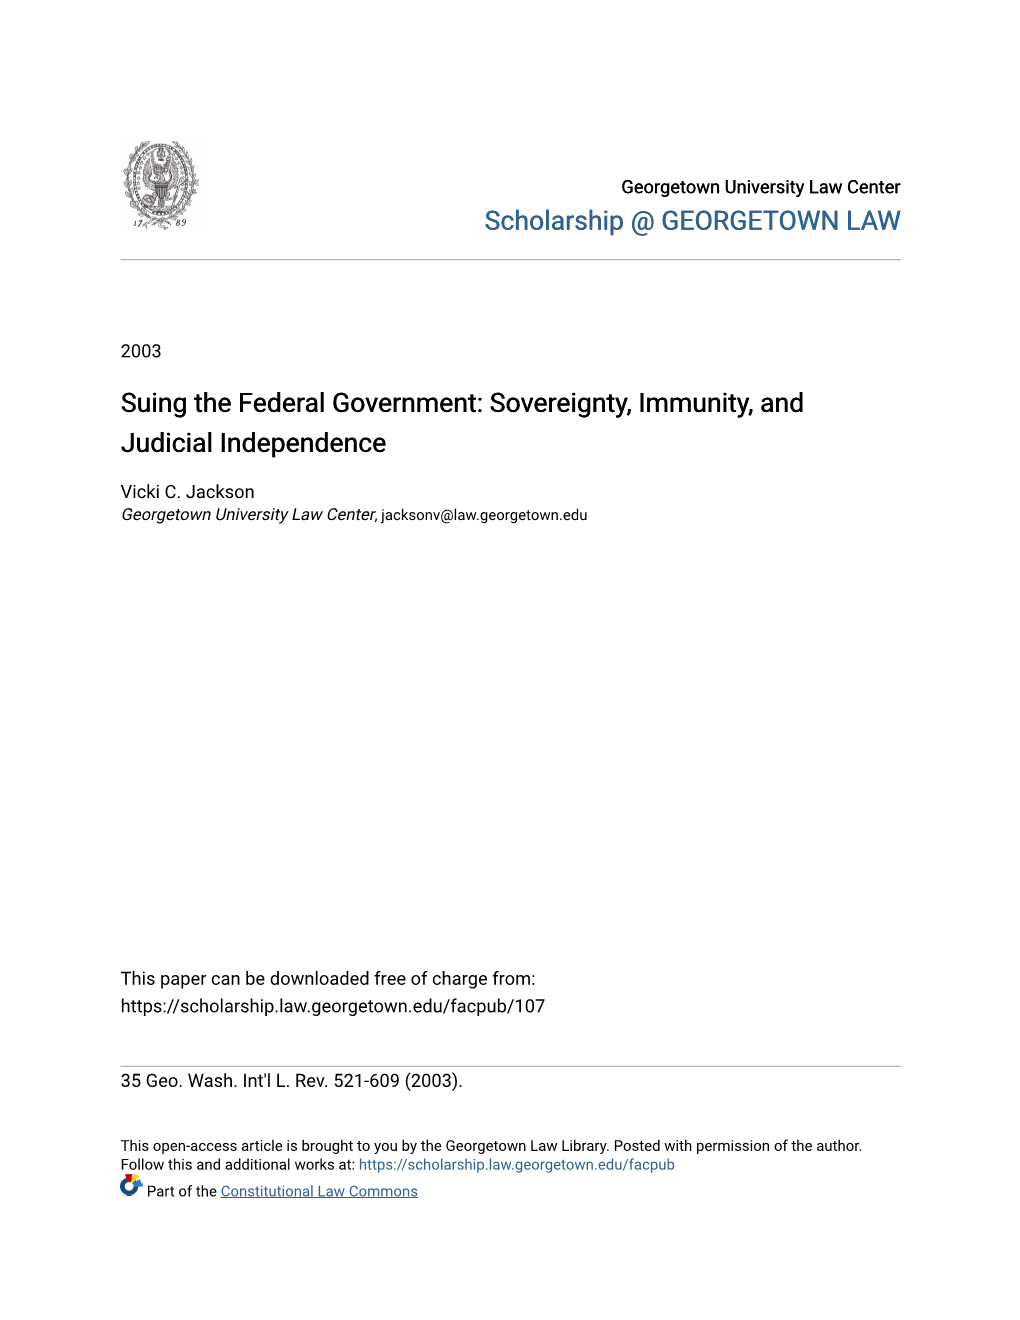 Suing the Federal Government: Sovereignty, Immunity, and Judicial Independence